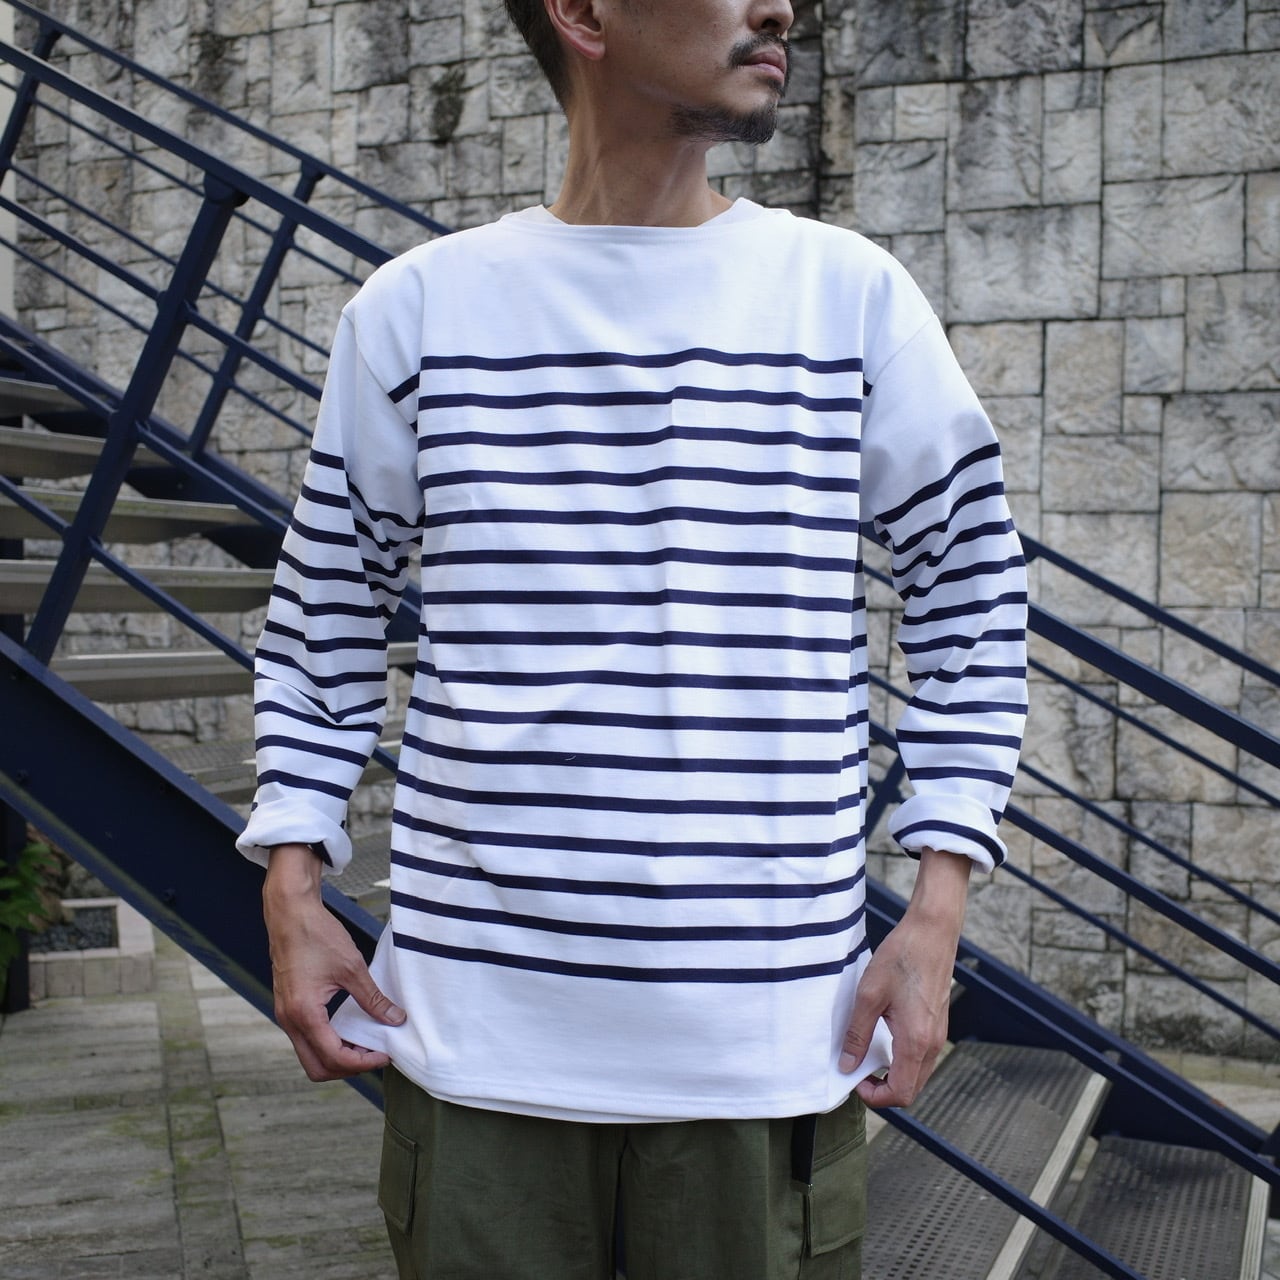 SAINT JAMES(セントジェームス) /RESTOCK 99 JC 162/1R -NEIGE/MARINE- /Size T1-T6 |  Signs powered by BASE